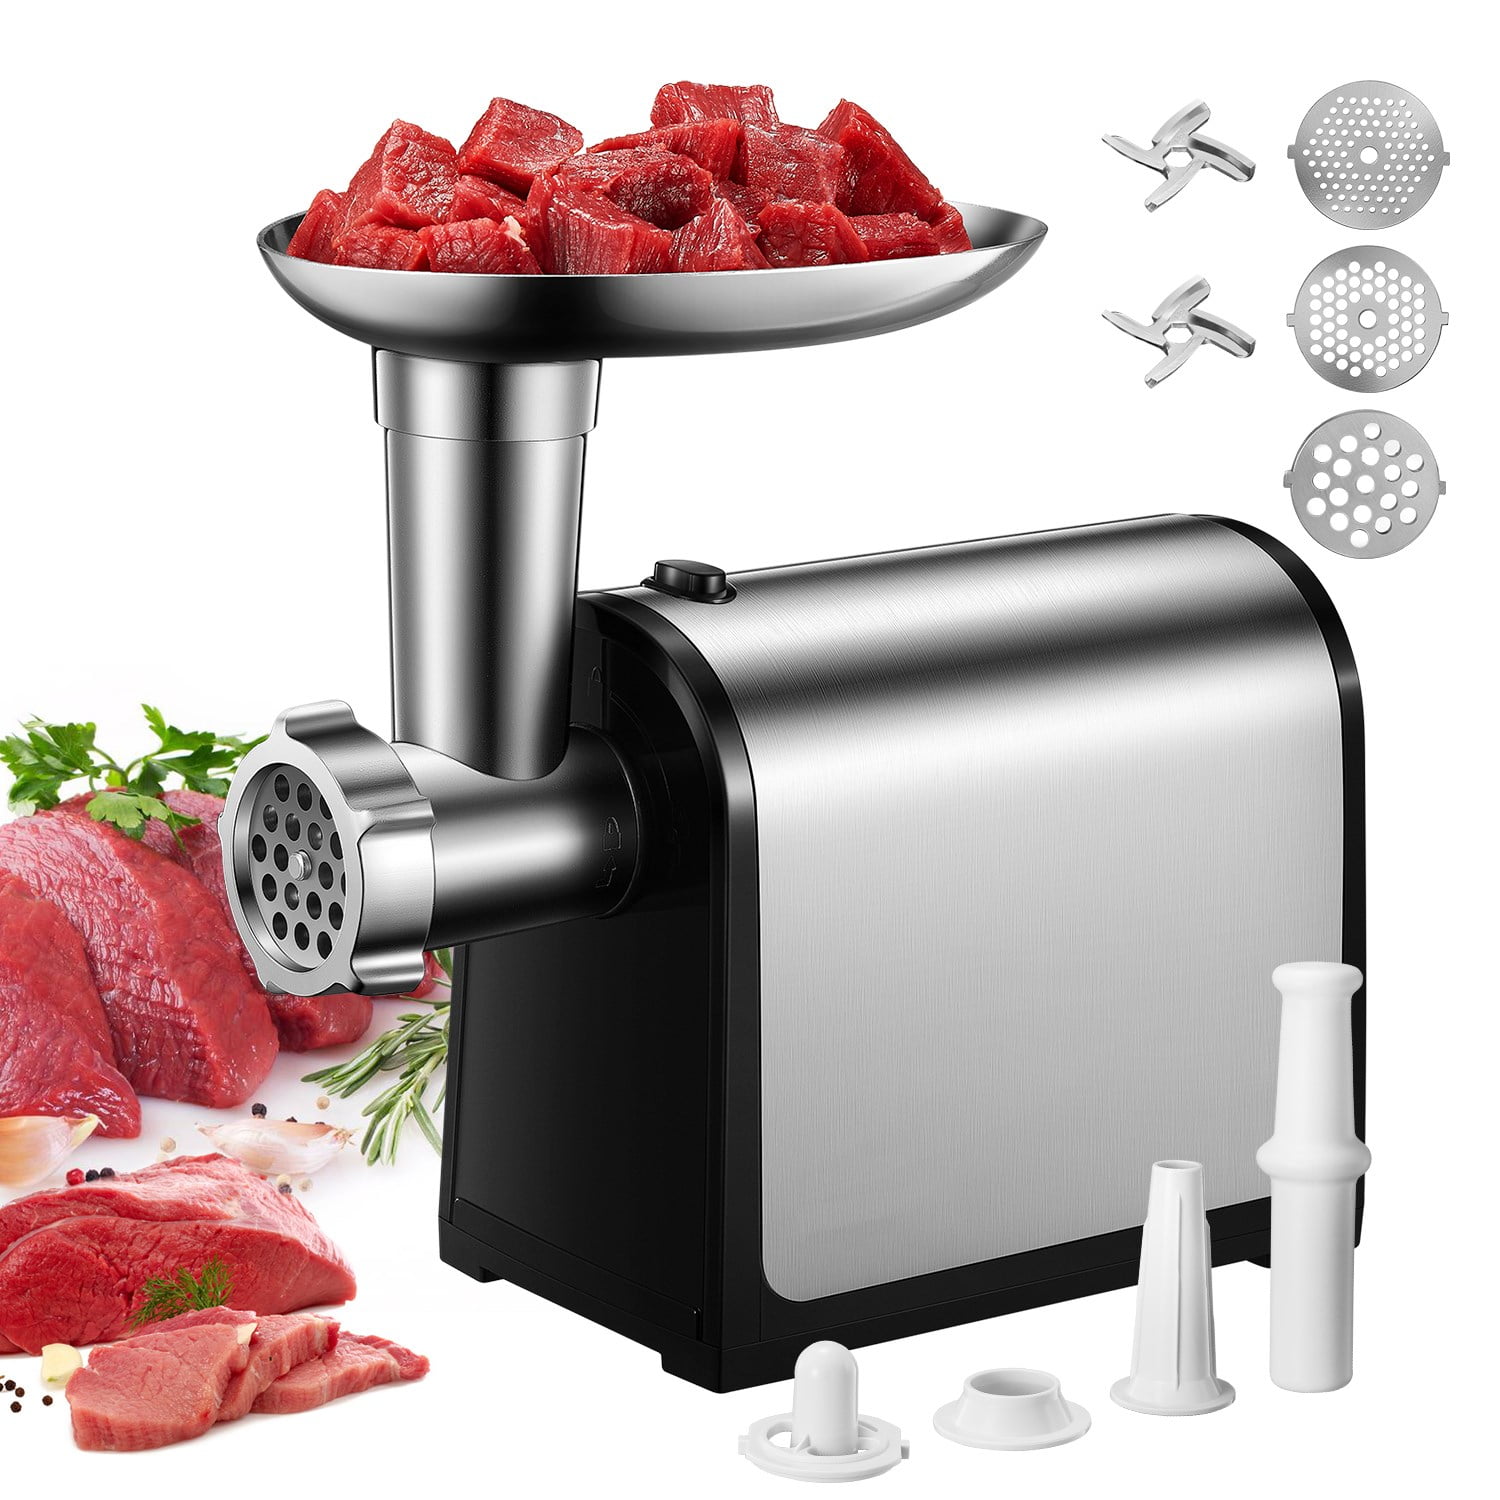 Meat Grinder Electric Home Kitchen Use CHEFFANO Stainless Steel Meat Grinder Machine Sausage Stuffer Sausage Kubbe Kit Sets 2000W Max ETL Approved Meat Mincer with 2 Blades 3 Grinding Plates 